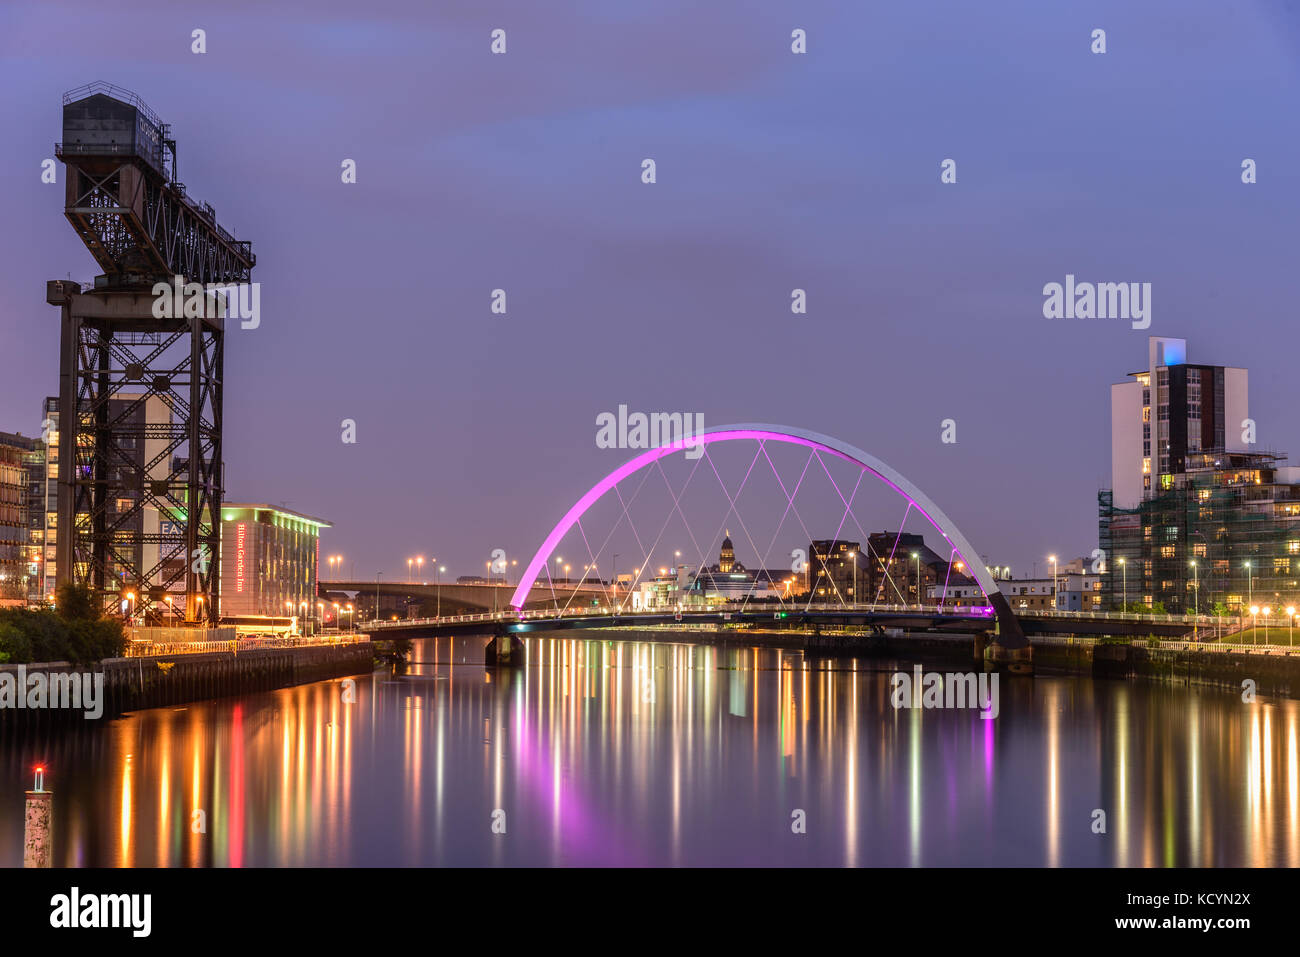 GLASGOW, SCOTLAND - AUGUST 15, 2017 - Night lights and the Clyde Arc Bridge at Glasgow City in Scotland over river. Stock Photo